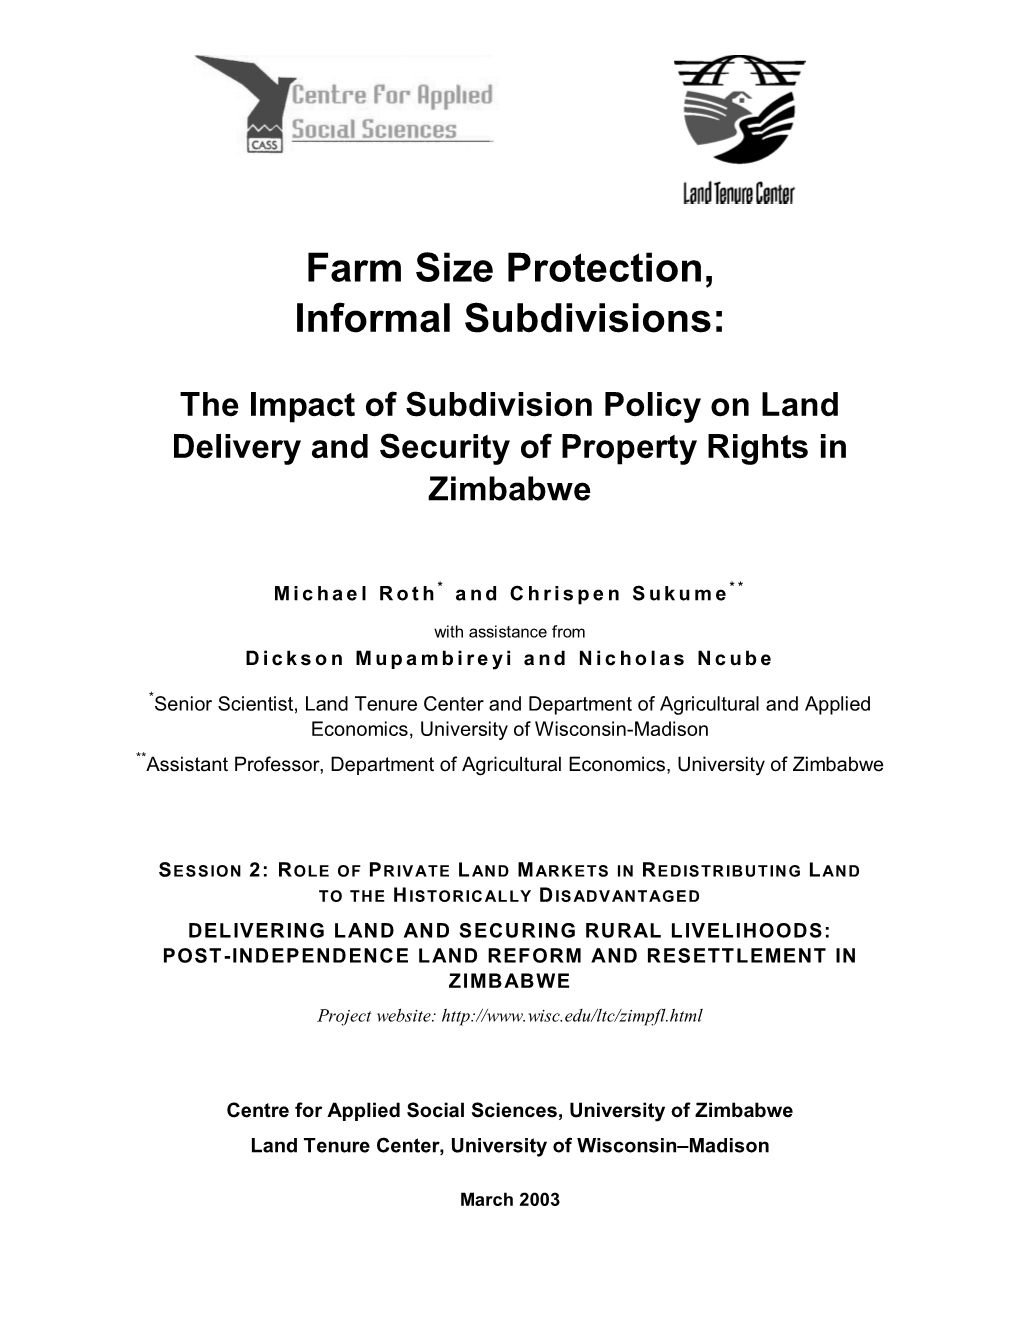 Farm Size Protection, Informal Subdivisions